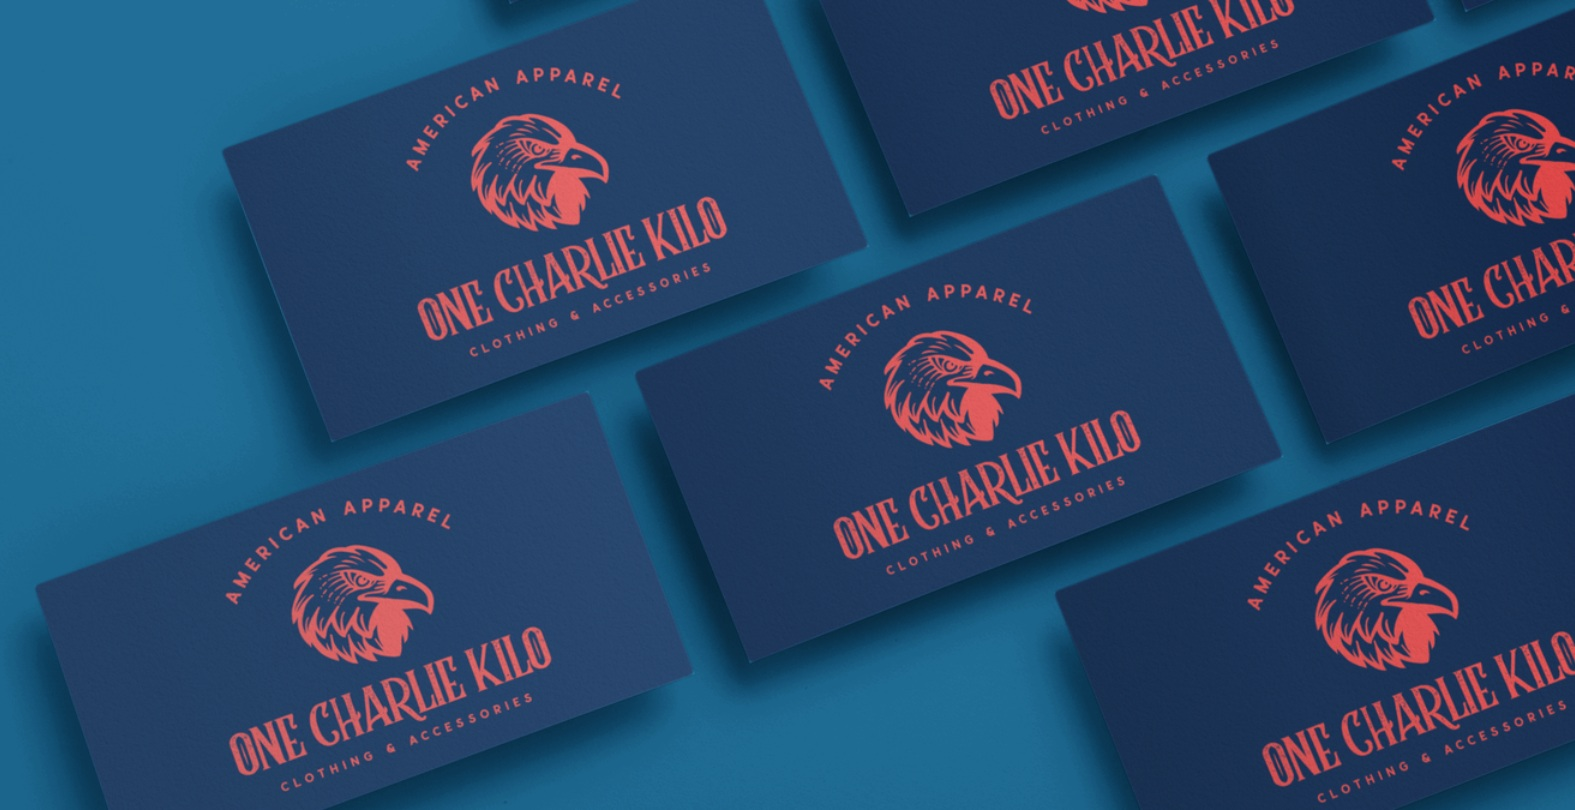 One Charlie Kilo e-Gift Cards on blue background with shadow